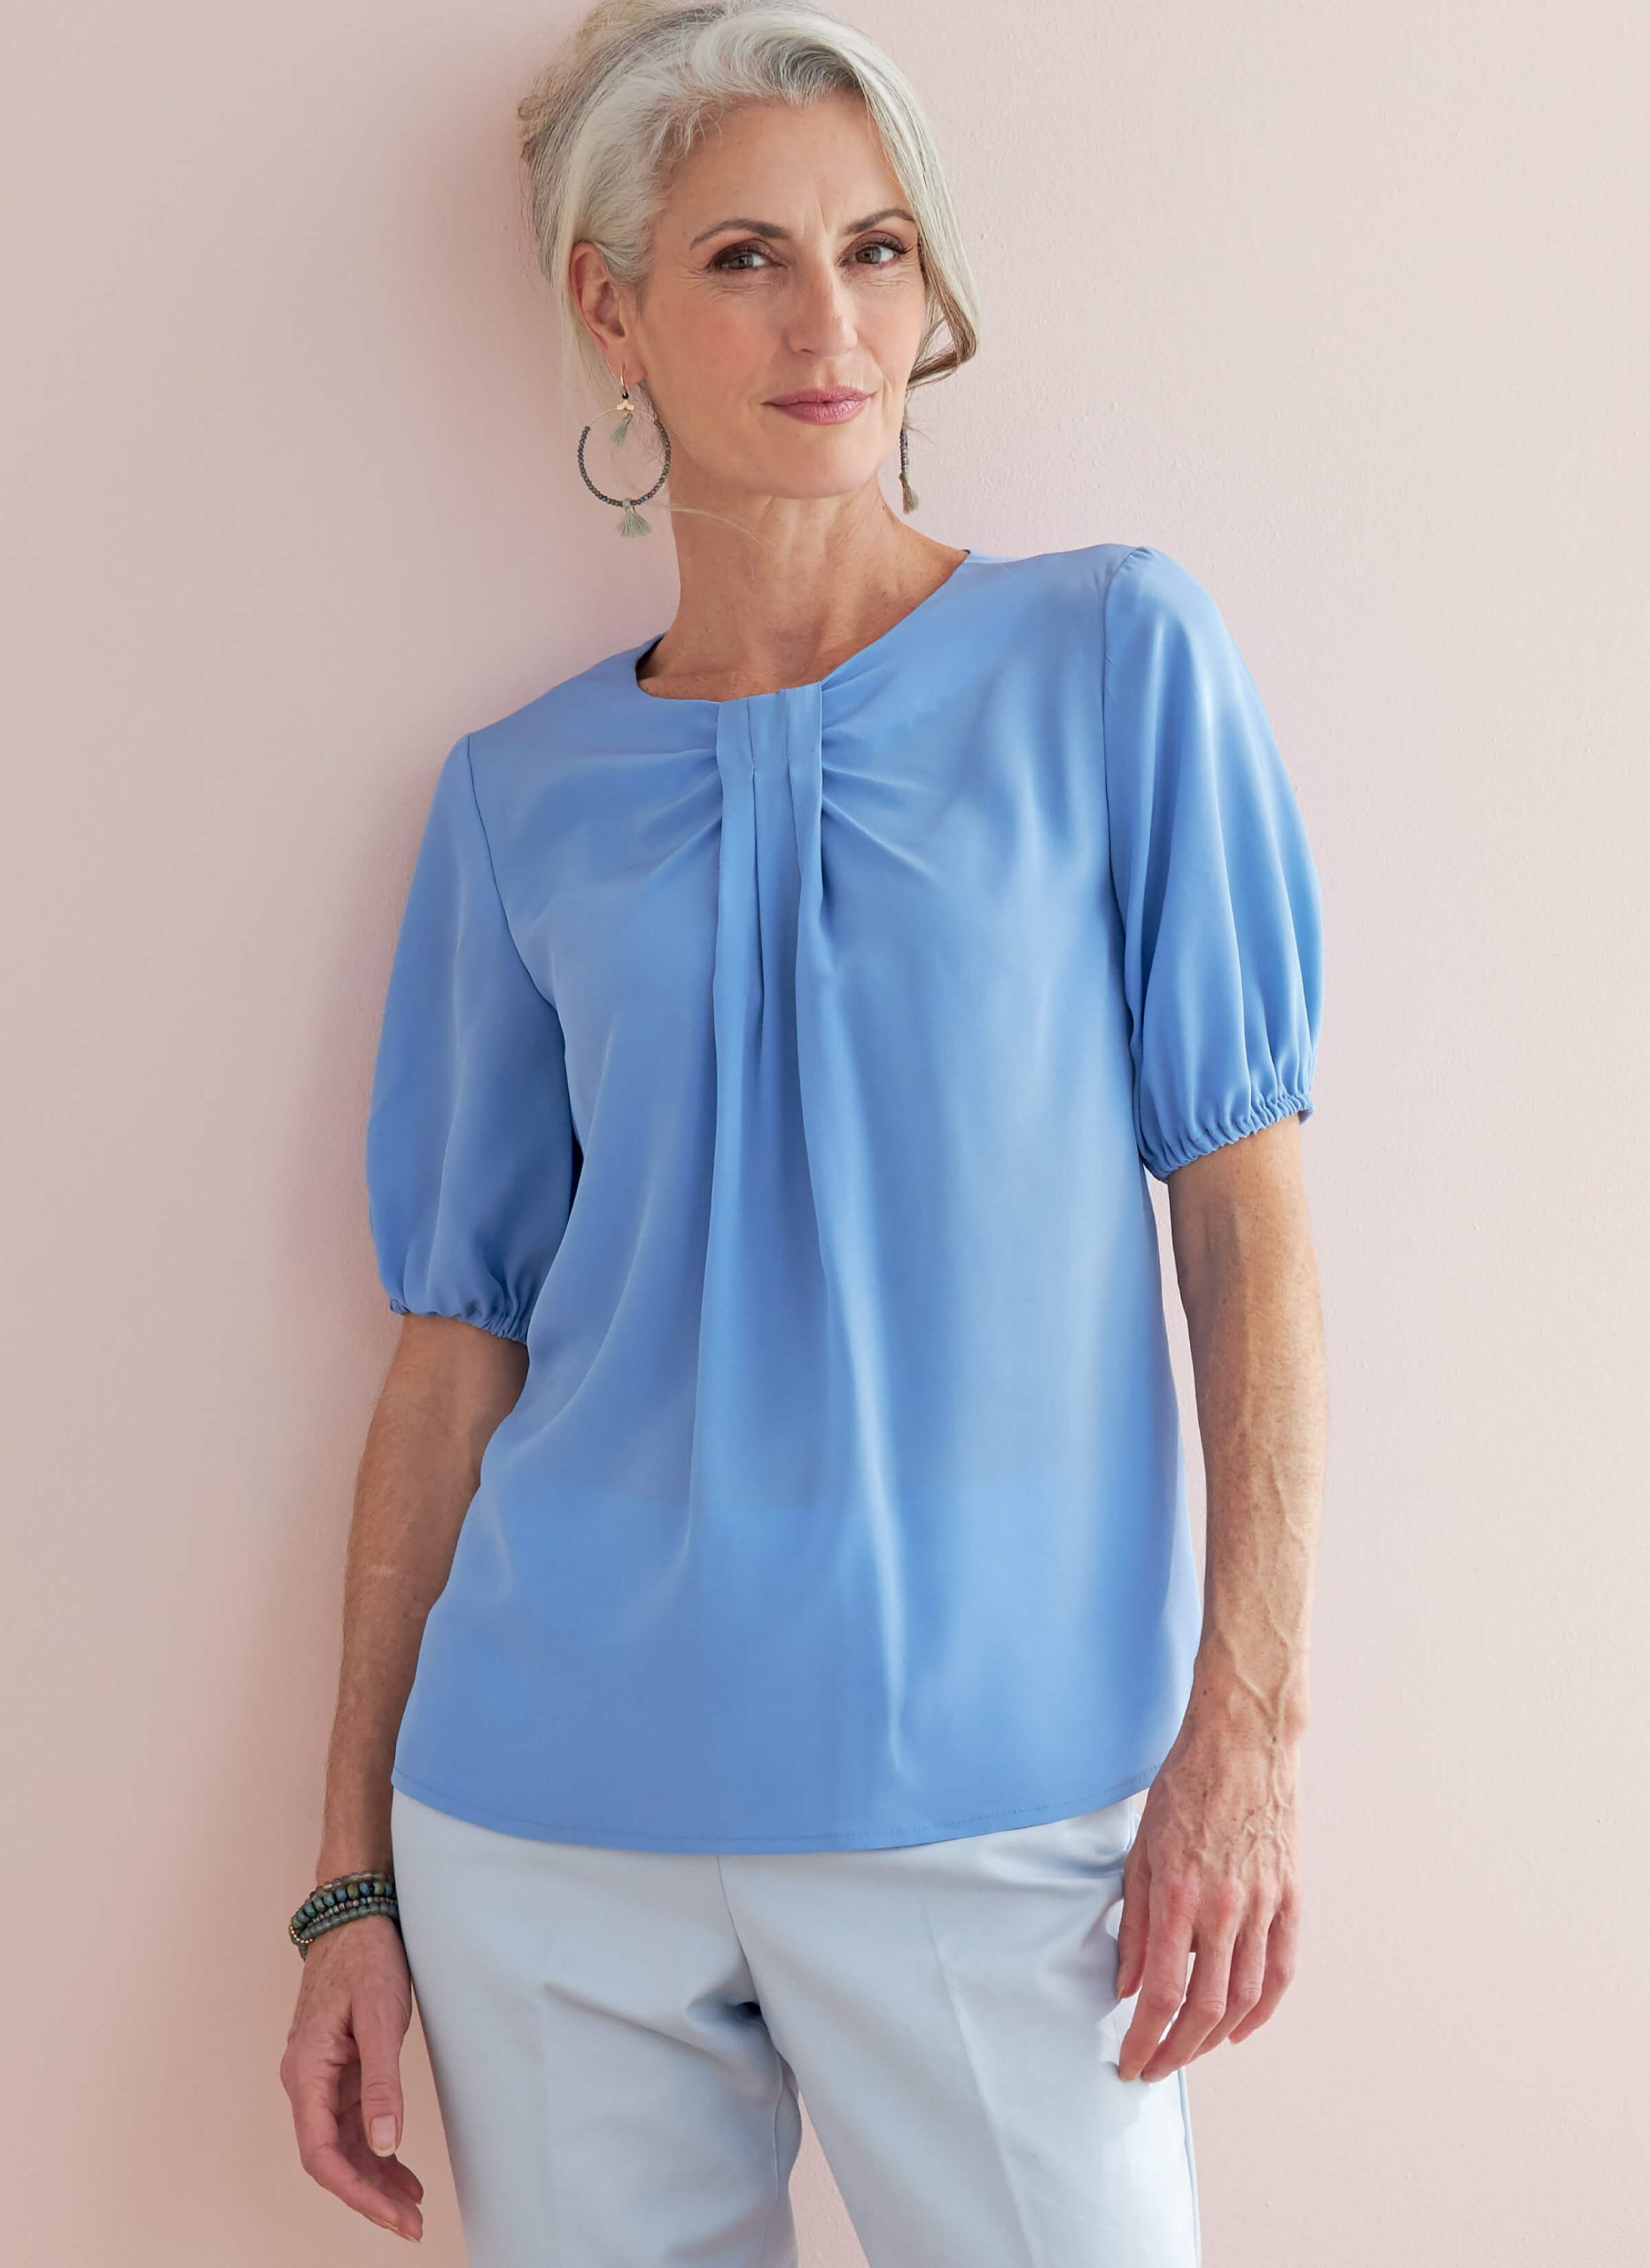 Butterick Sewing Pattern B6730 Misses' Top